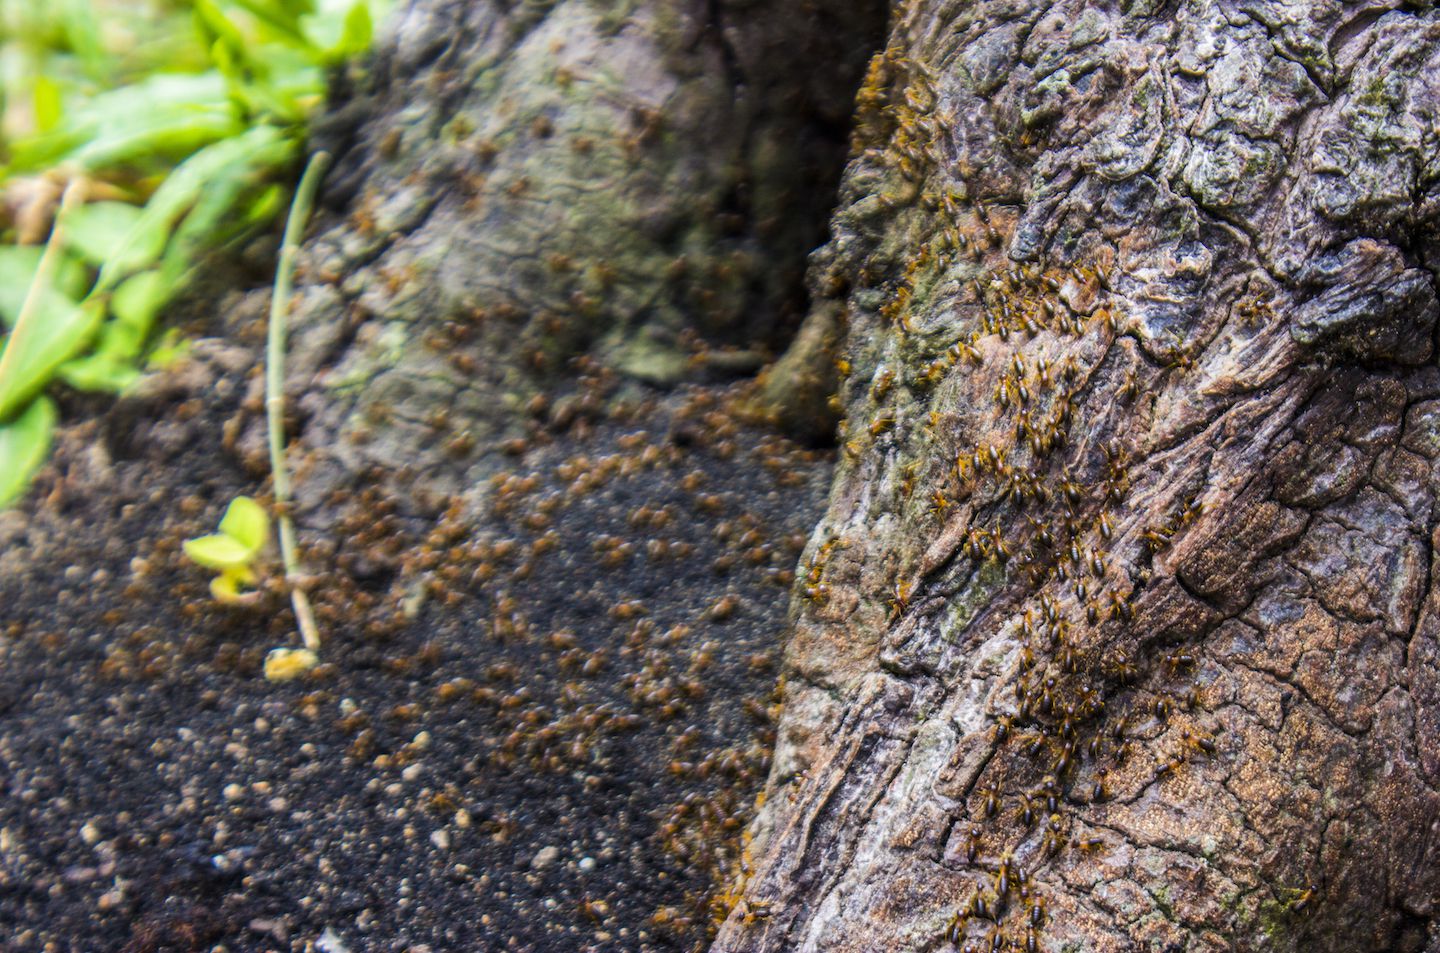 Marching ants, Koh Phi Phi, Thailand